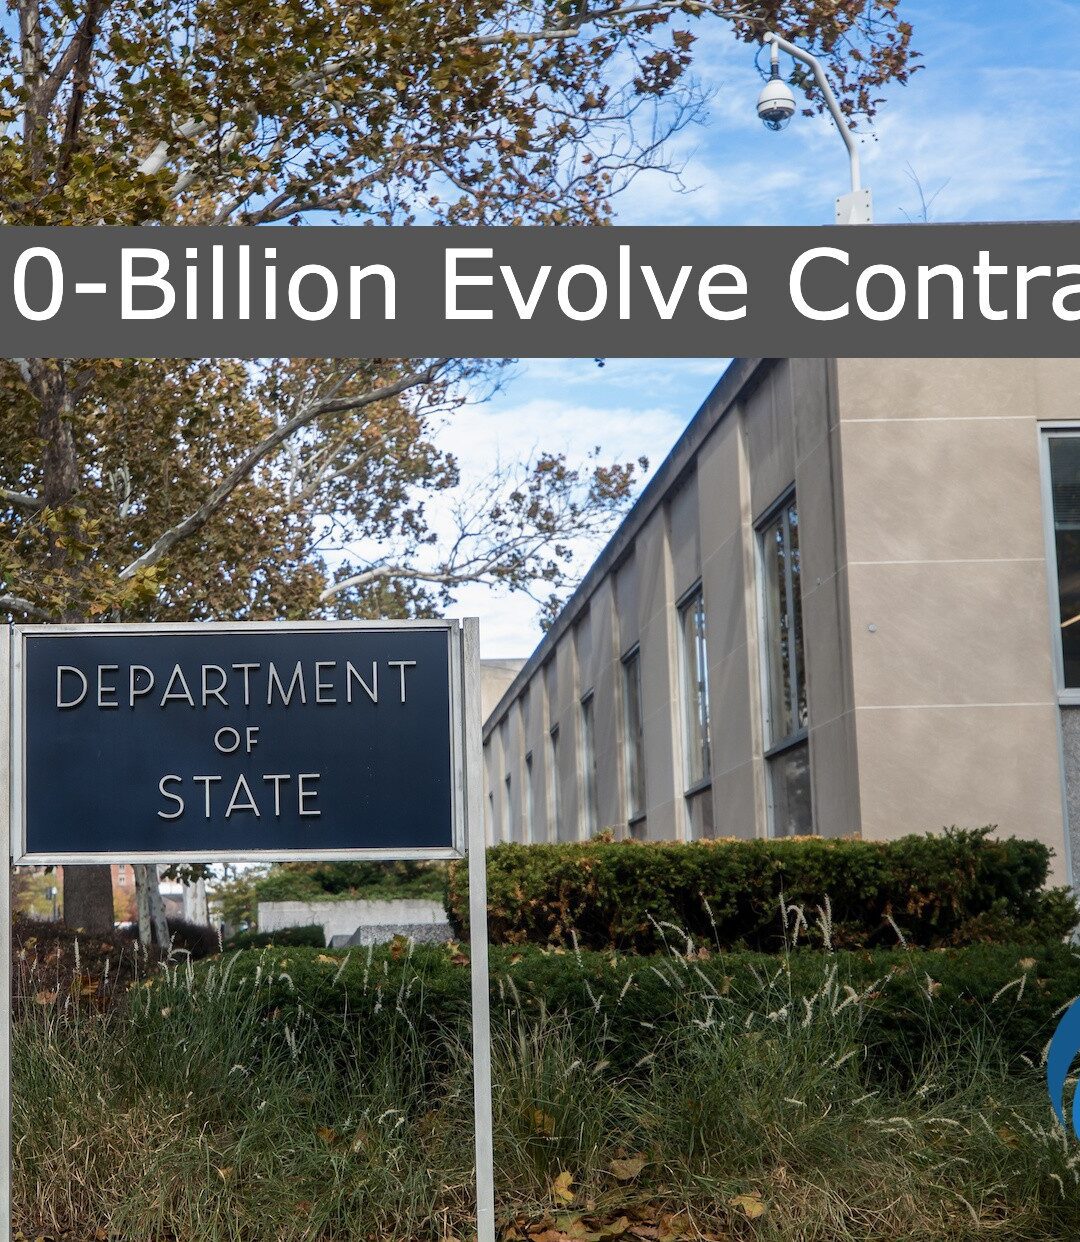 Update on State Department’s $10-Billion Evolve Contract